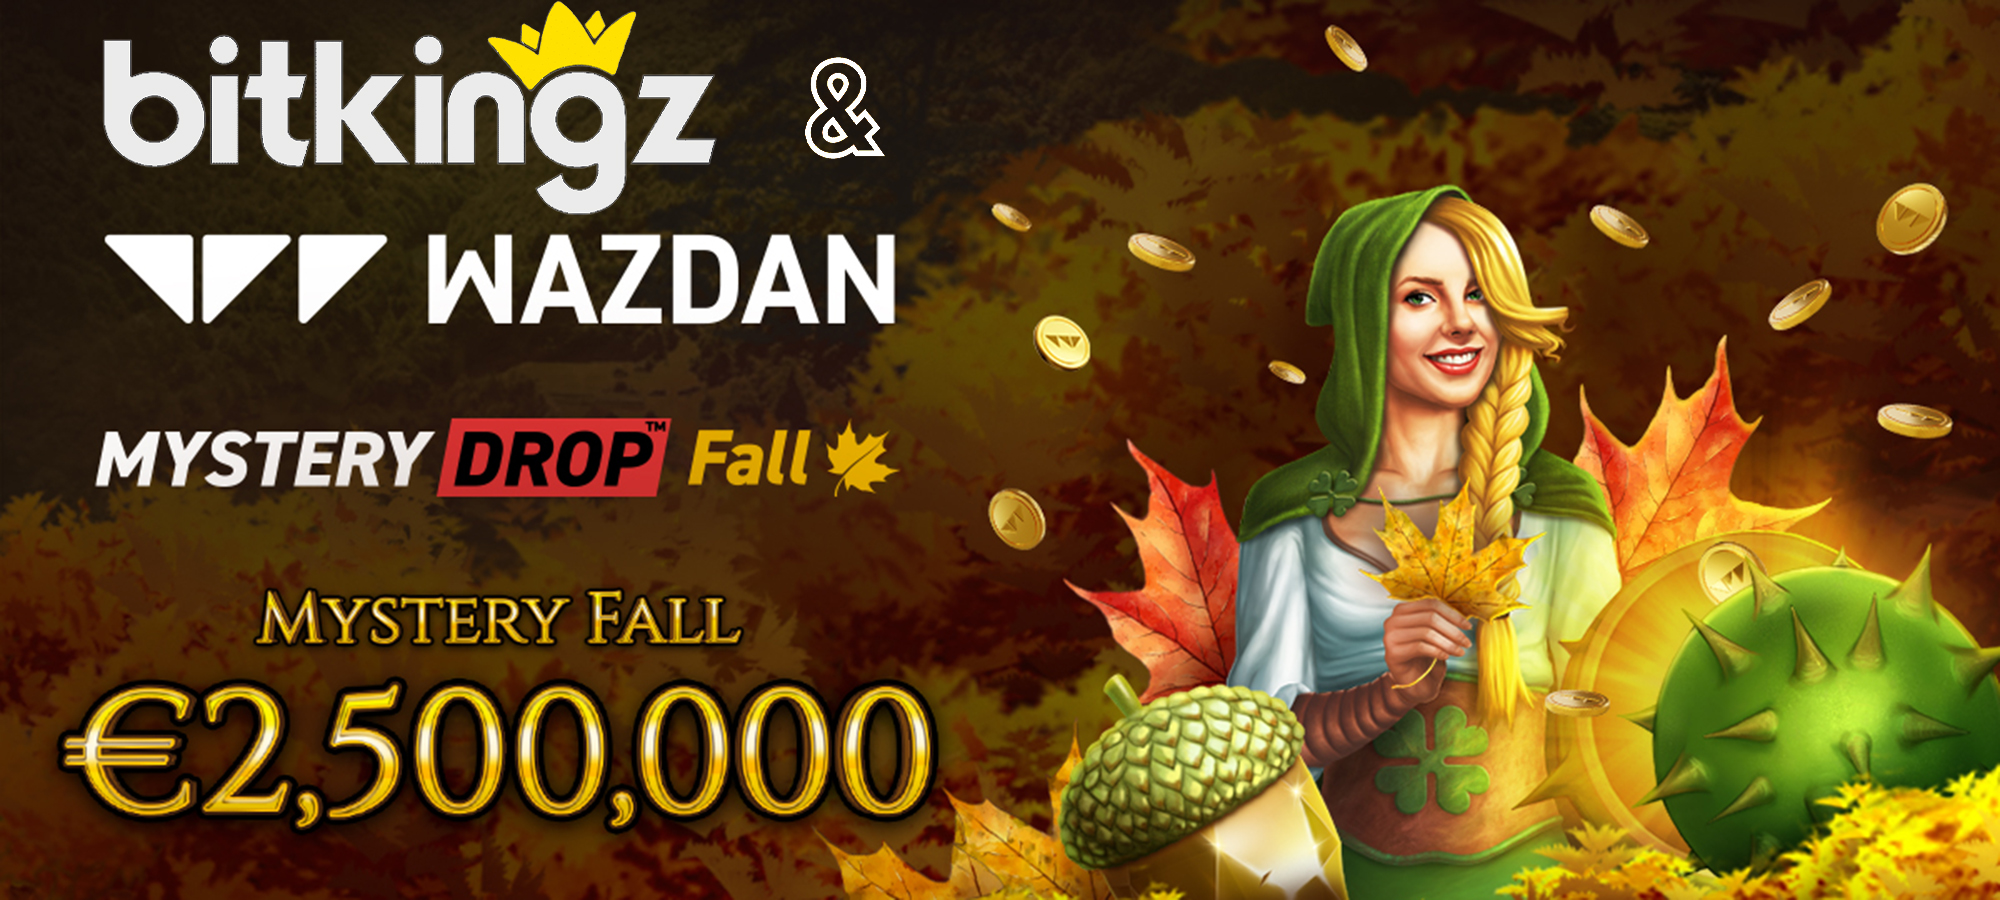 Join Wazdan’s Mystery Fall Promotion to Claim an Enormous Prize